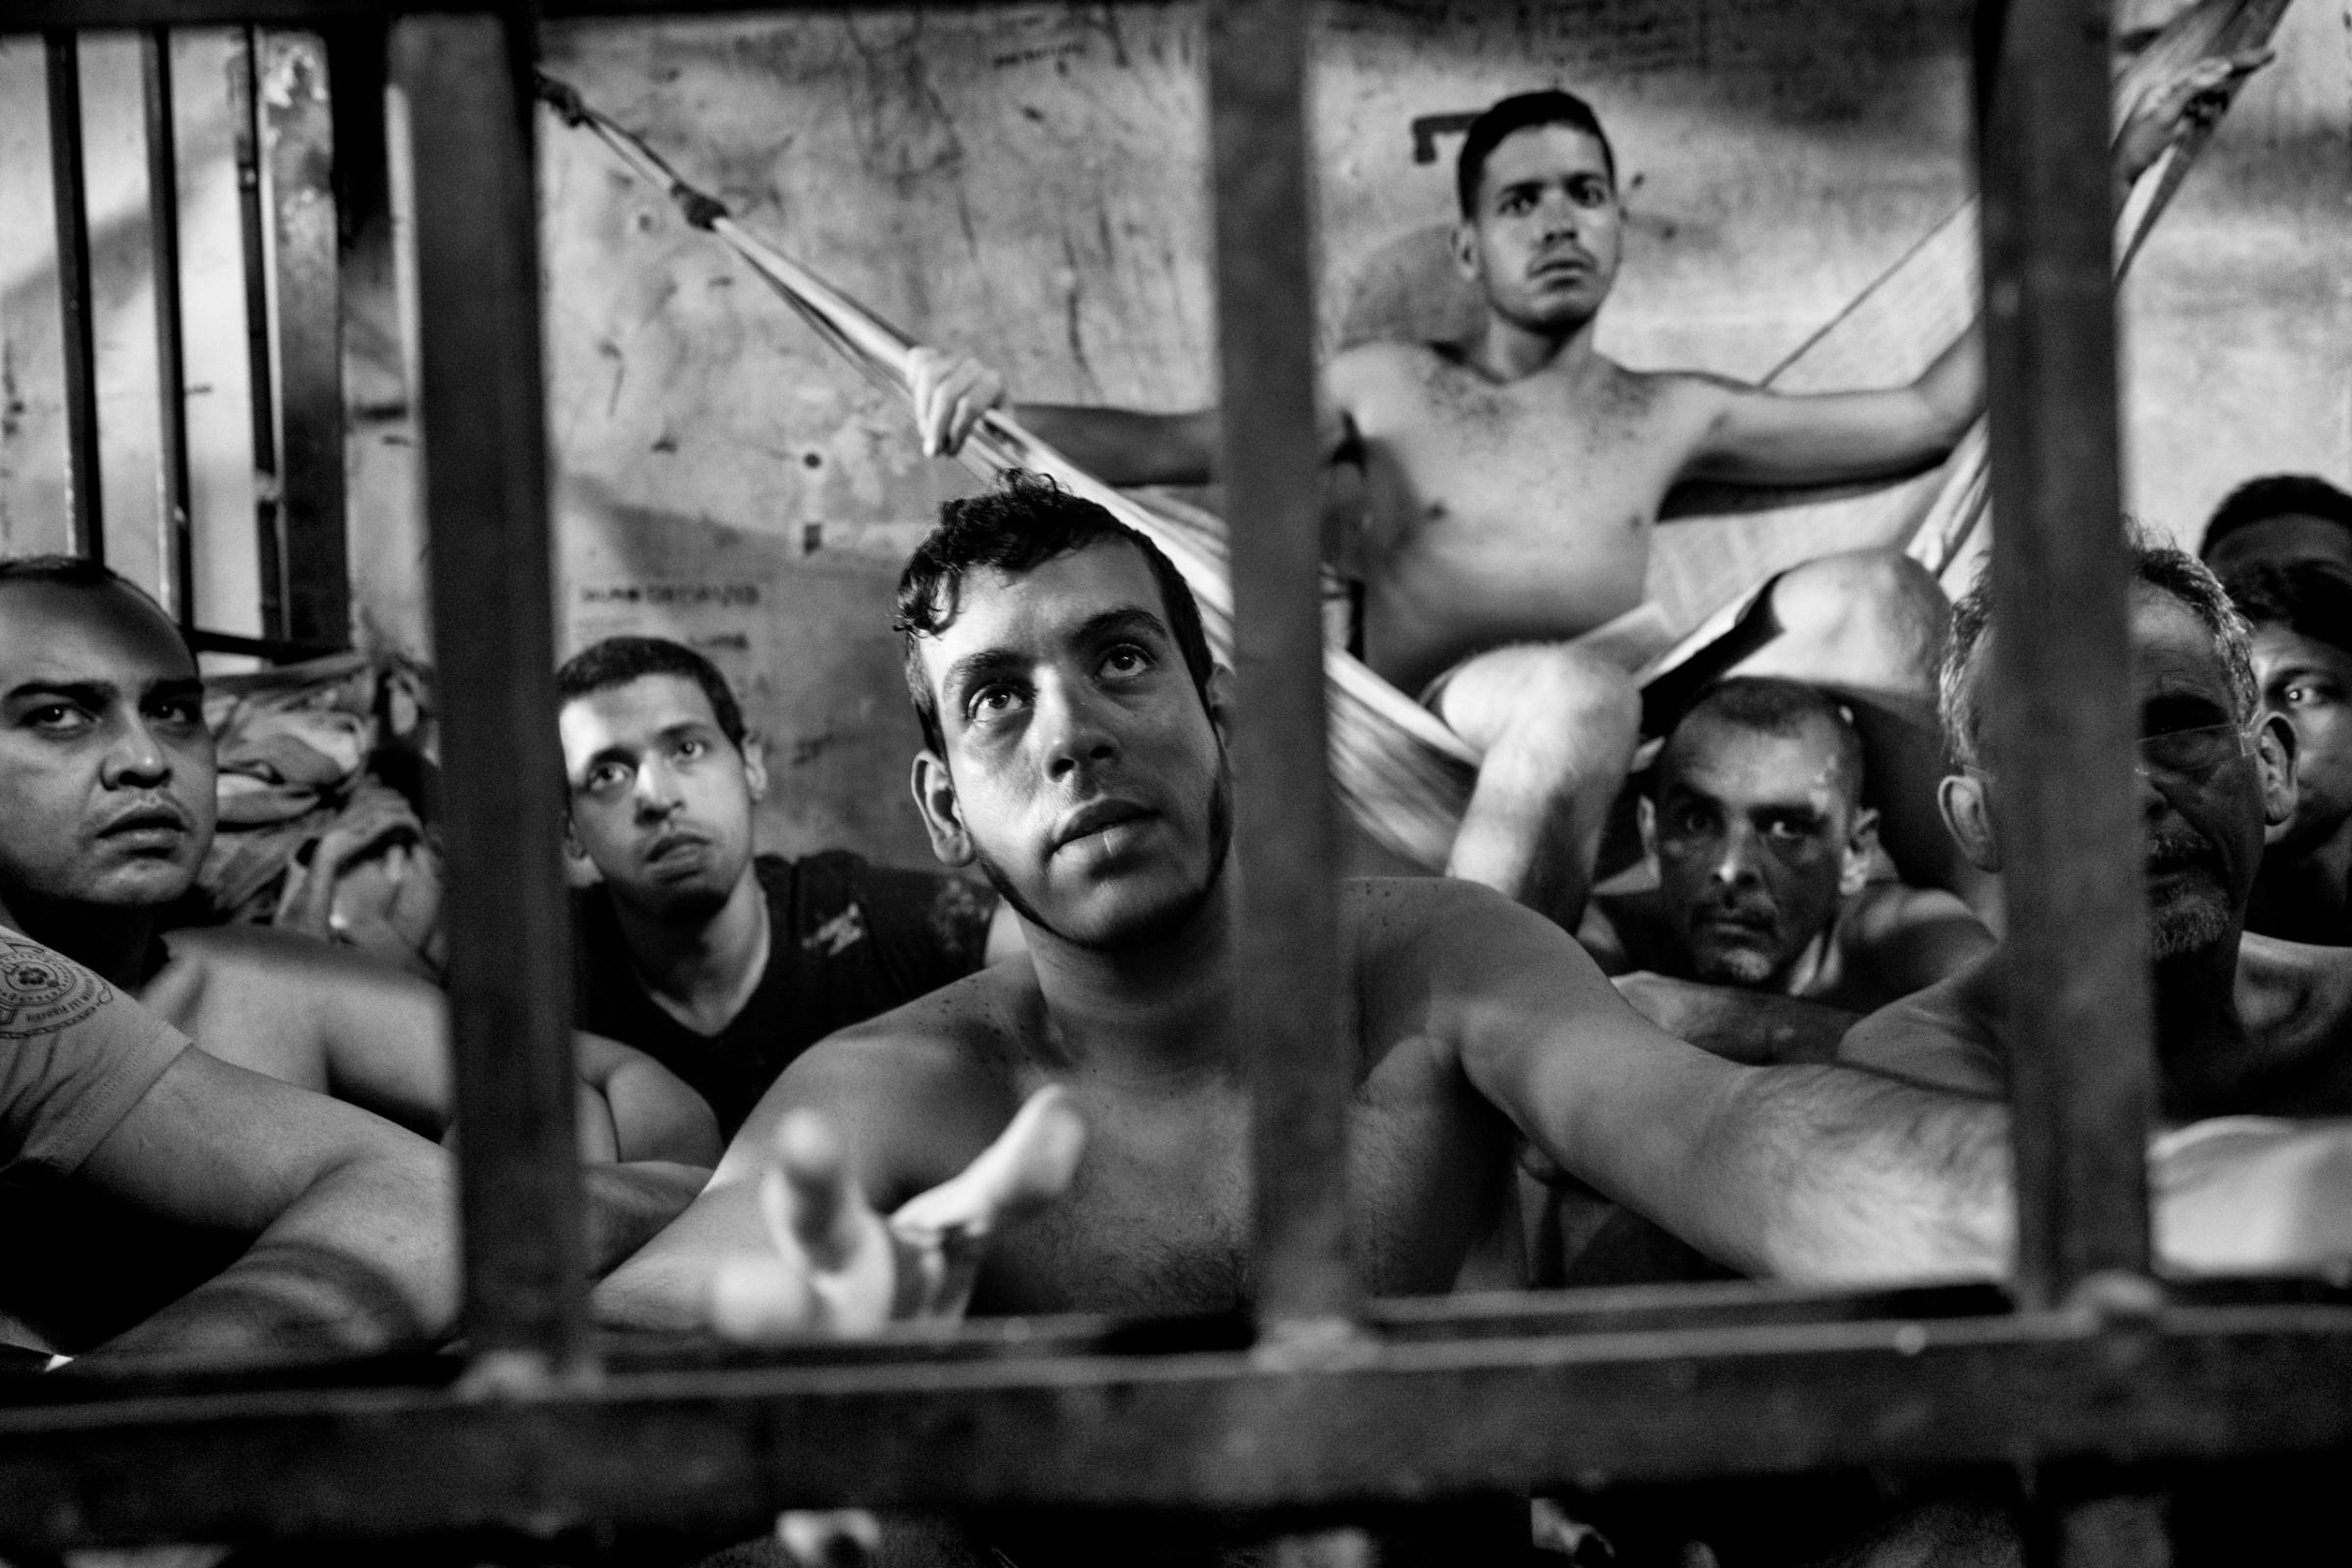 Prisoners inside a crowded cell at the Chacao municipal police station in eastern Caracas. There is no room to sit and prisoners take turns resting on sheets tied to bars like hammocks. Jails in Venezuela are seriously overcrowded with shortages of food and medicine. Because of the economic and political crisis, the number of prisoners grows daily as more Venezuelans are arrested for crimes, including mugging, kidnapping and murder, June 2016.